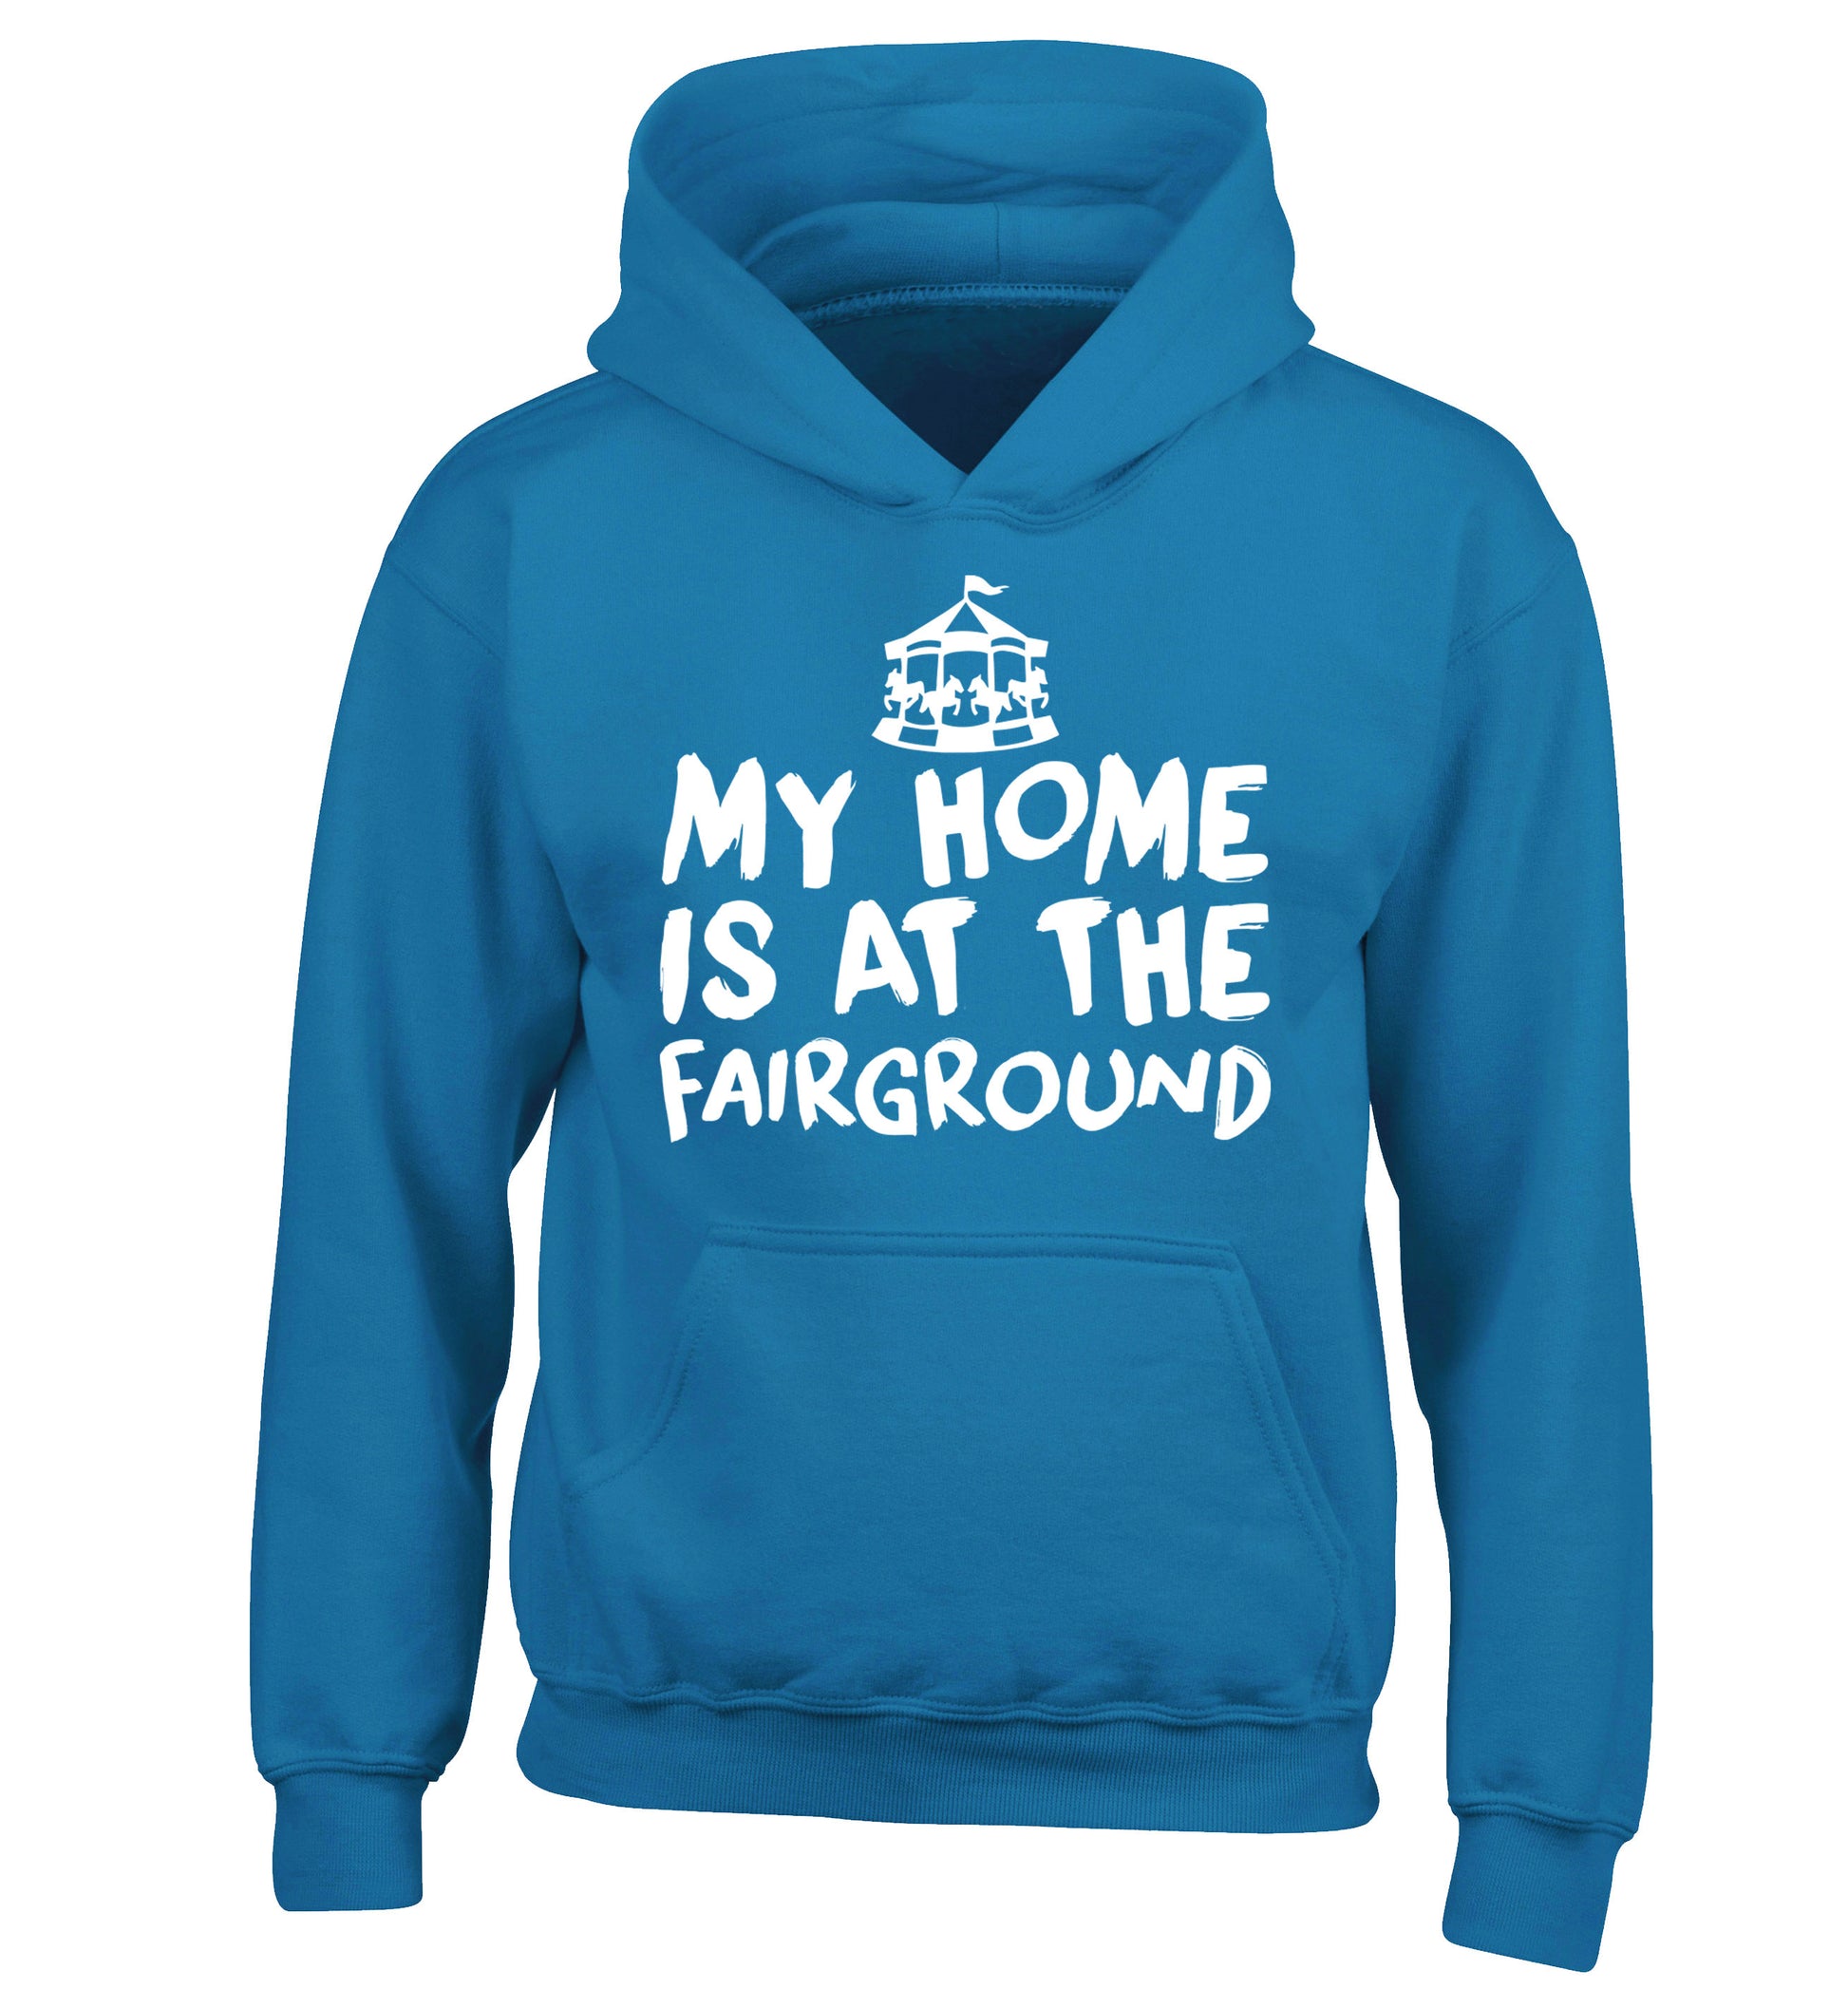 My home is at the fairground children's blue hoodie 12-14 Years